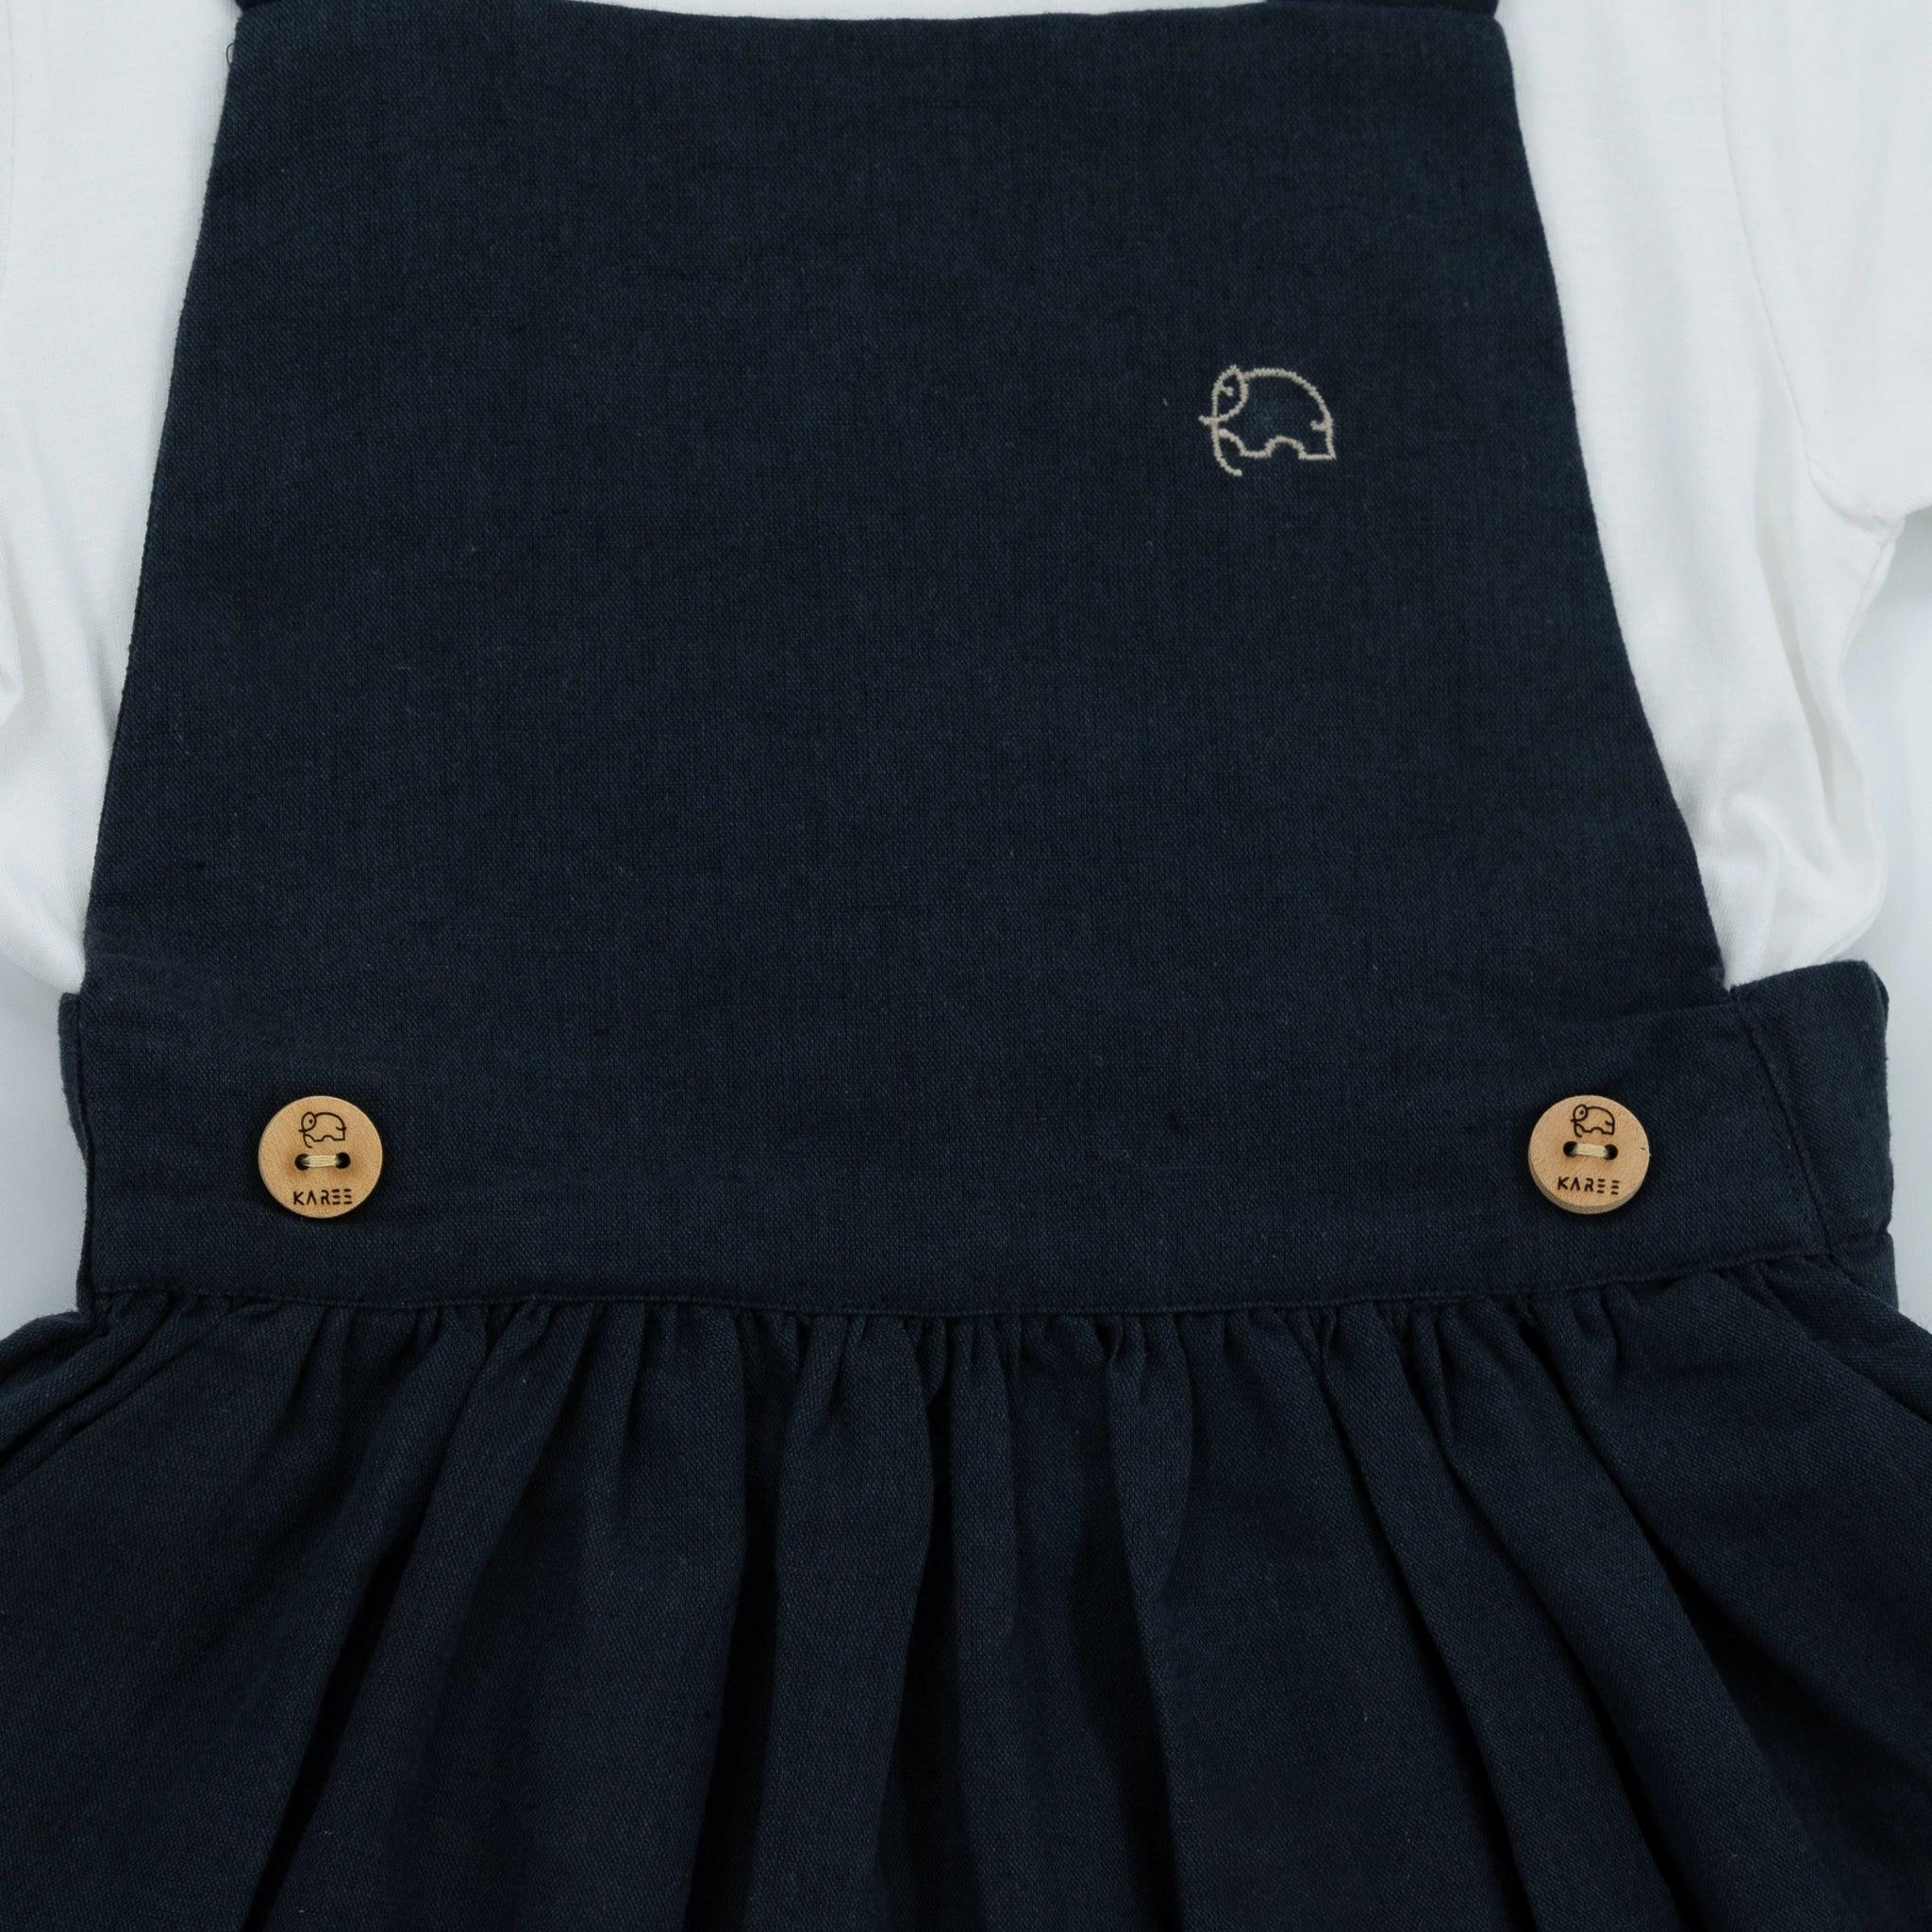 Close-up of an Ebony Black Linen Pinafore for Girls from Karee with two wooden buttons and a small white embroidered logo on the front, exemplifying timeless sophistication.